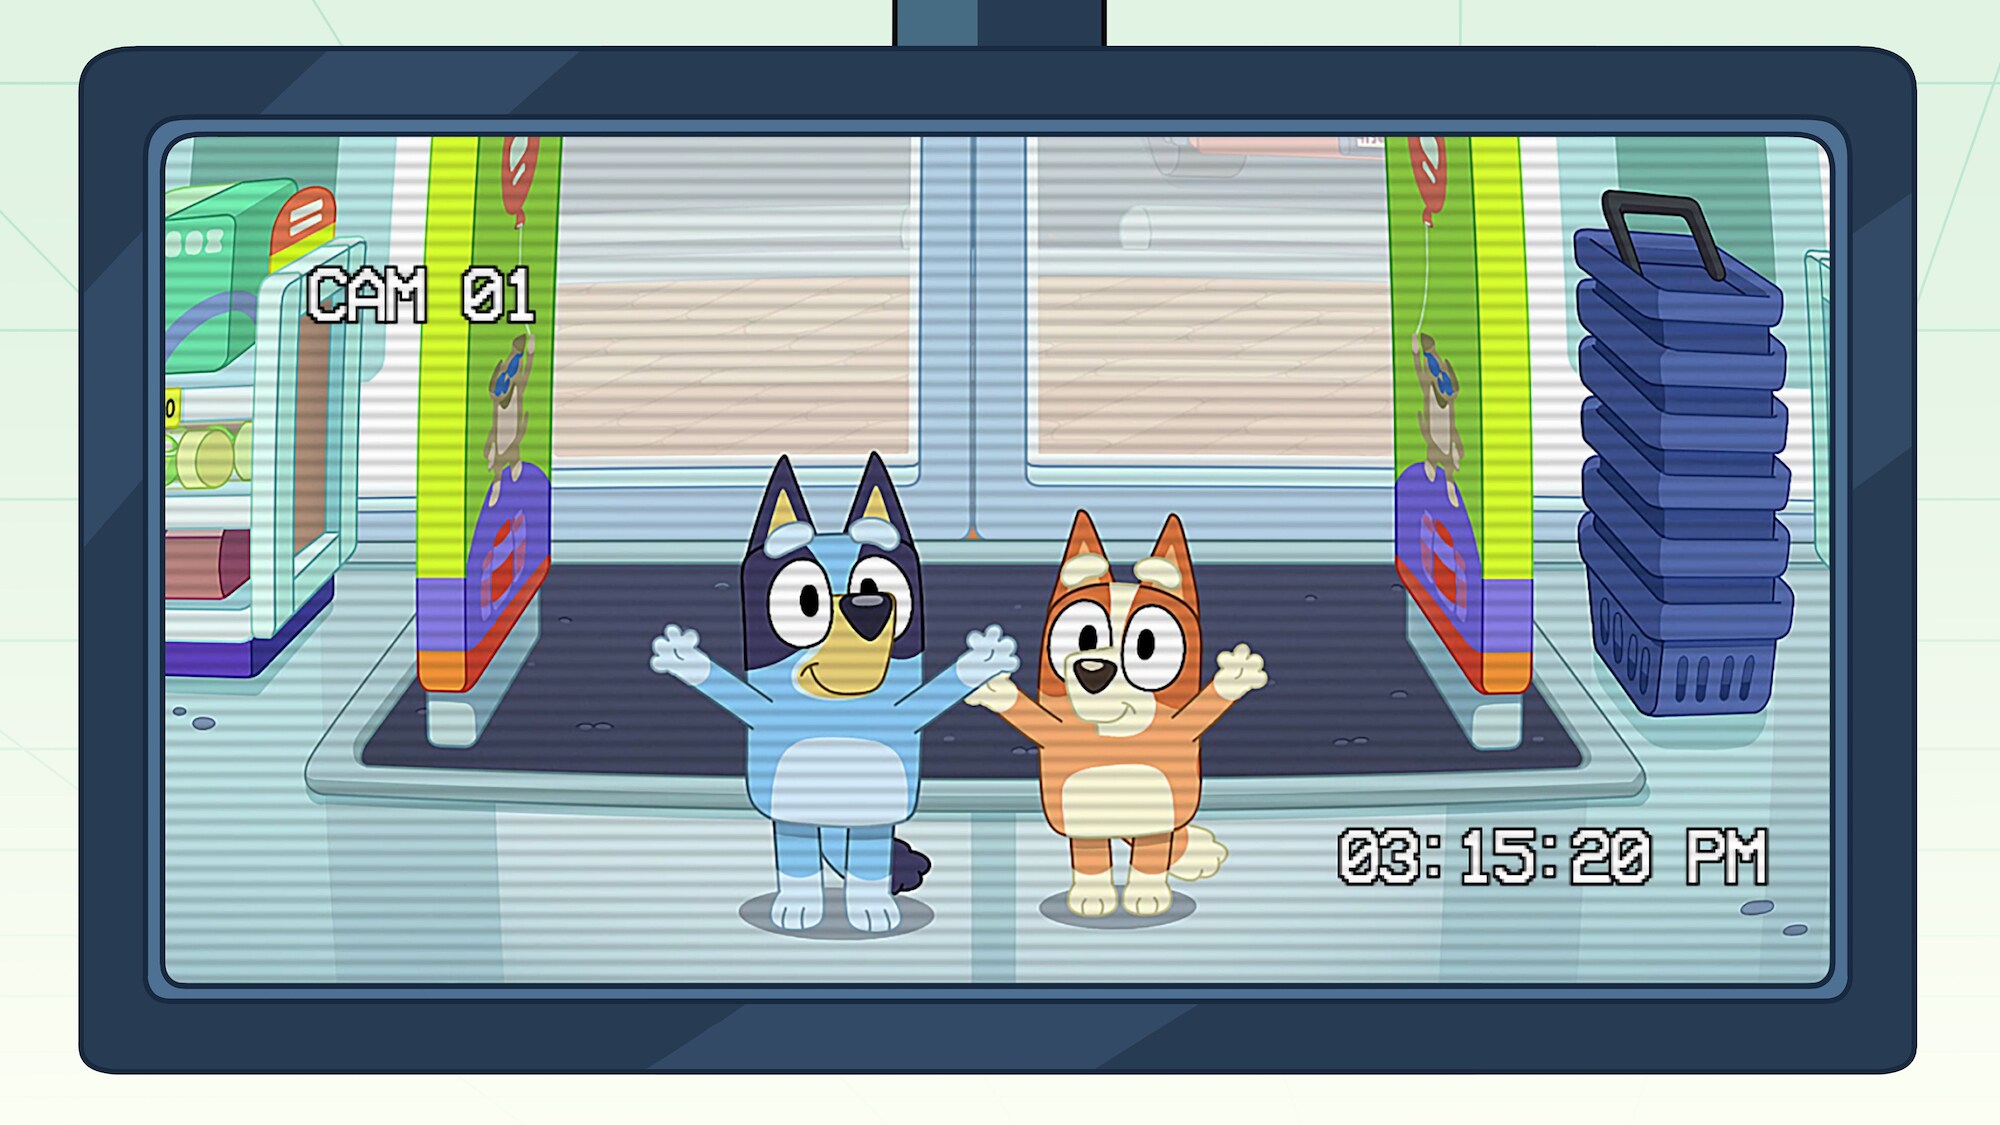 Bluey and Bingo are excited to play games with the chemist tv screens. (Credit: Ludo Studio)